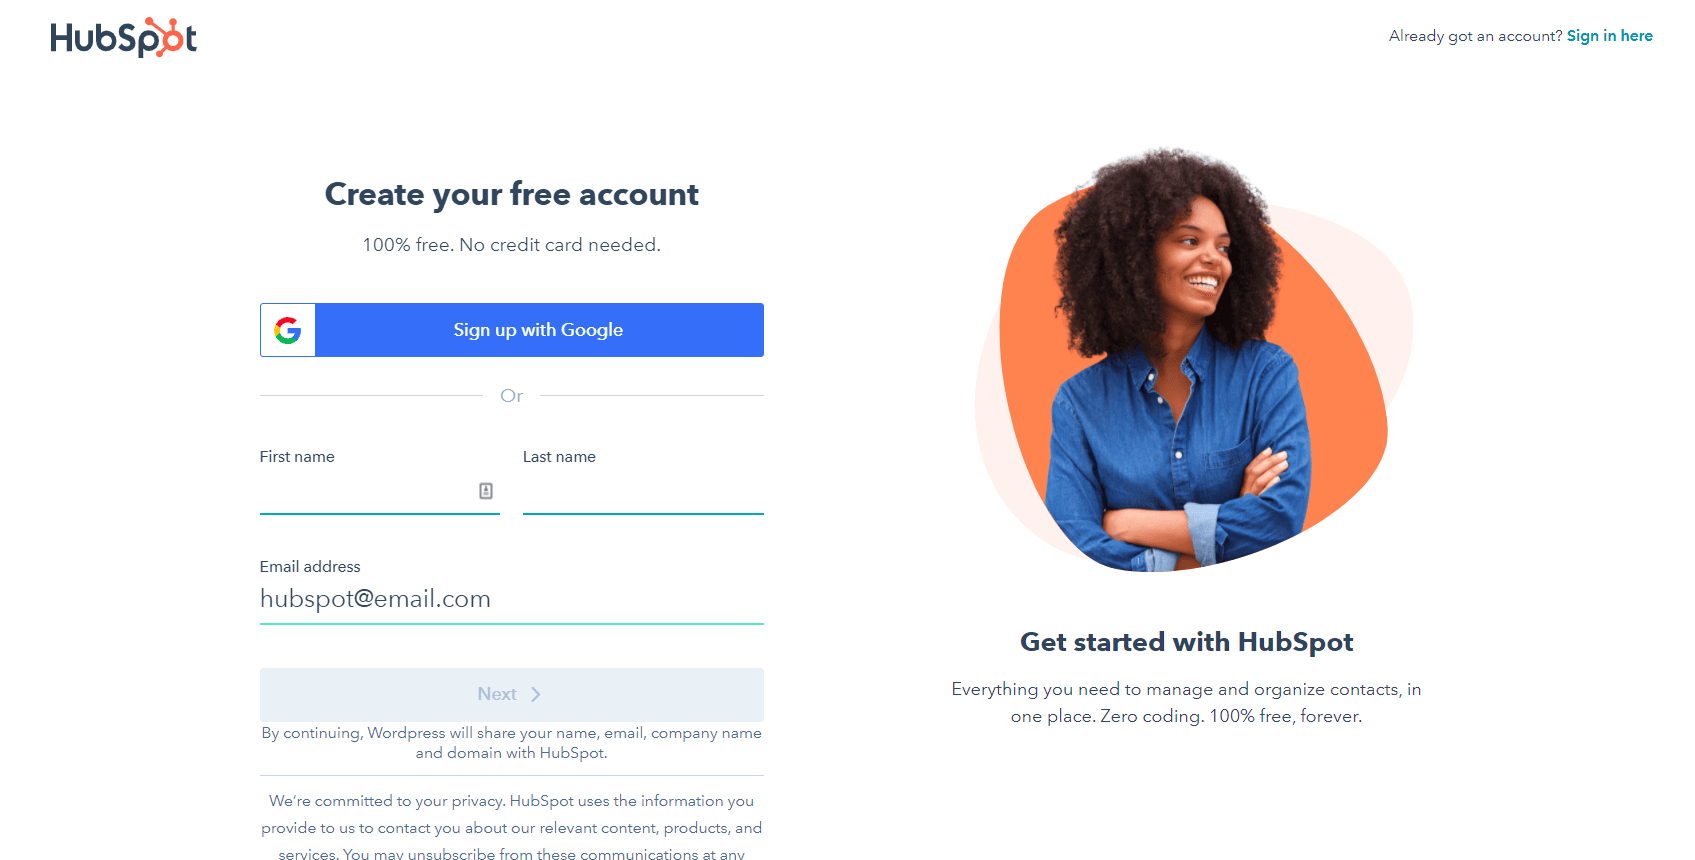 Create your free HubSpot account